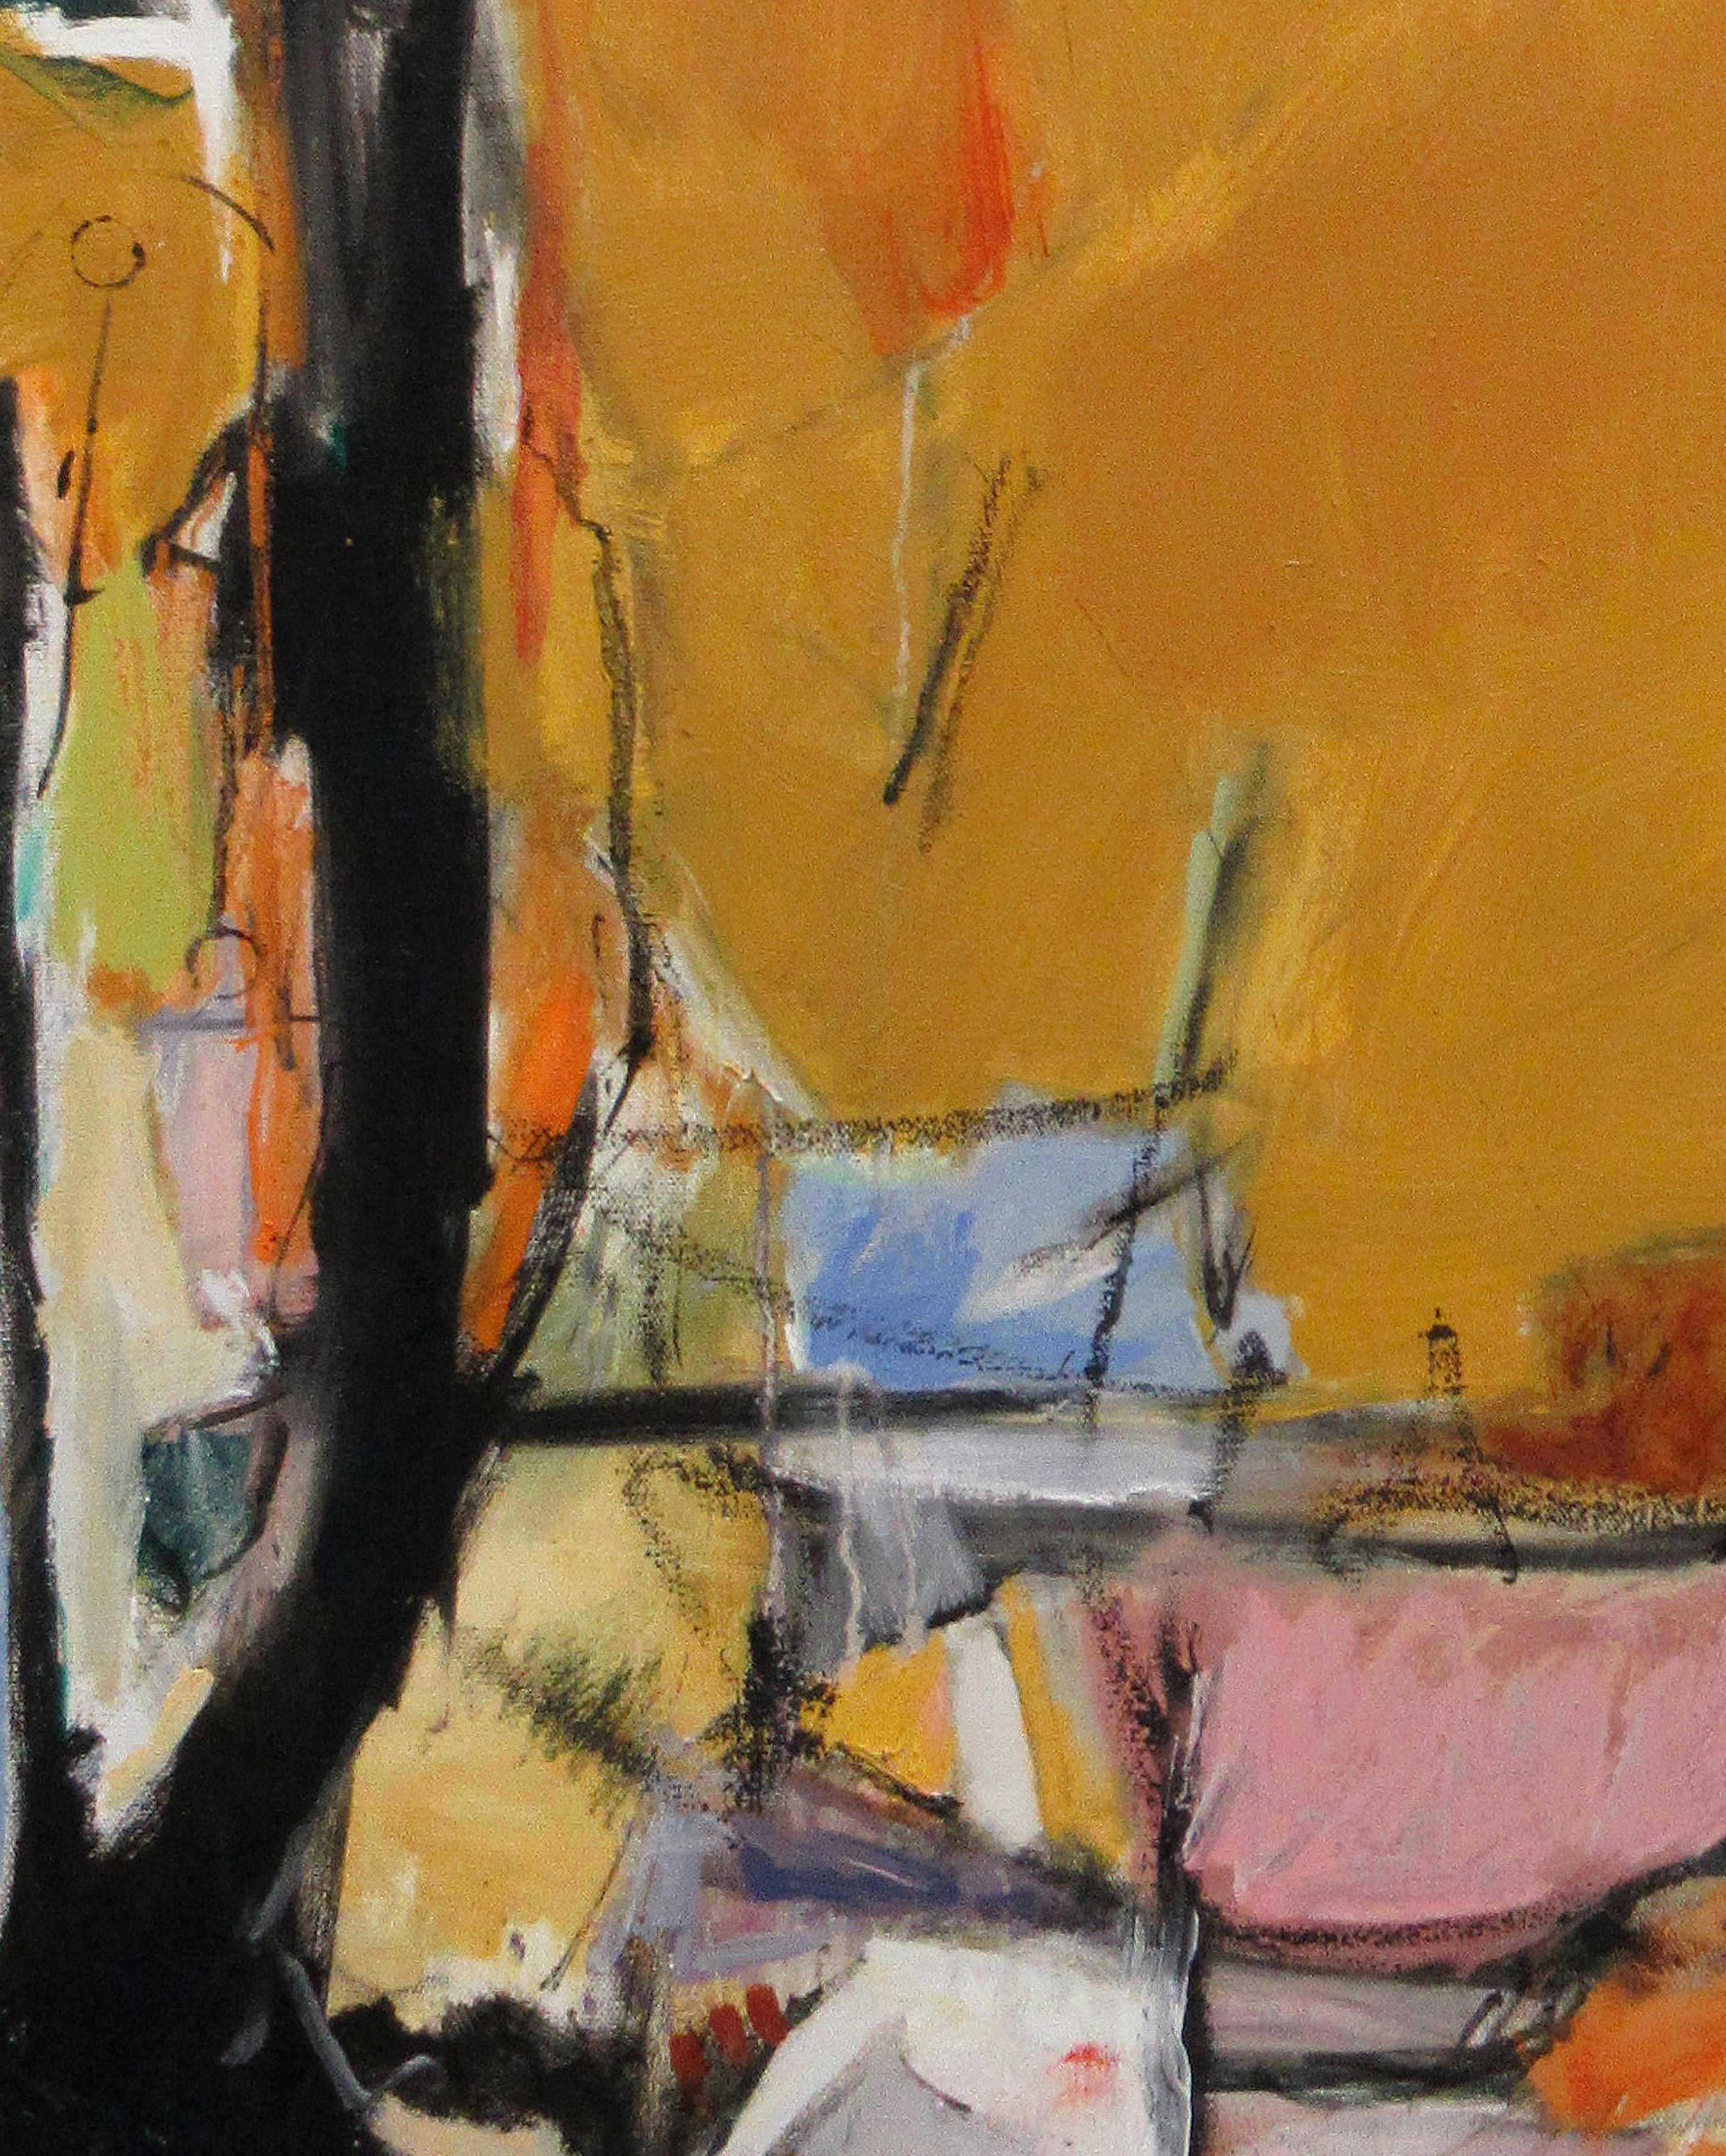 FIRST LIGHT (3 of 3), Original Contemporary Abstract Expressionist Painting, 2020
40